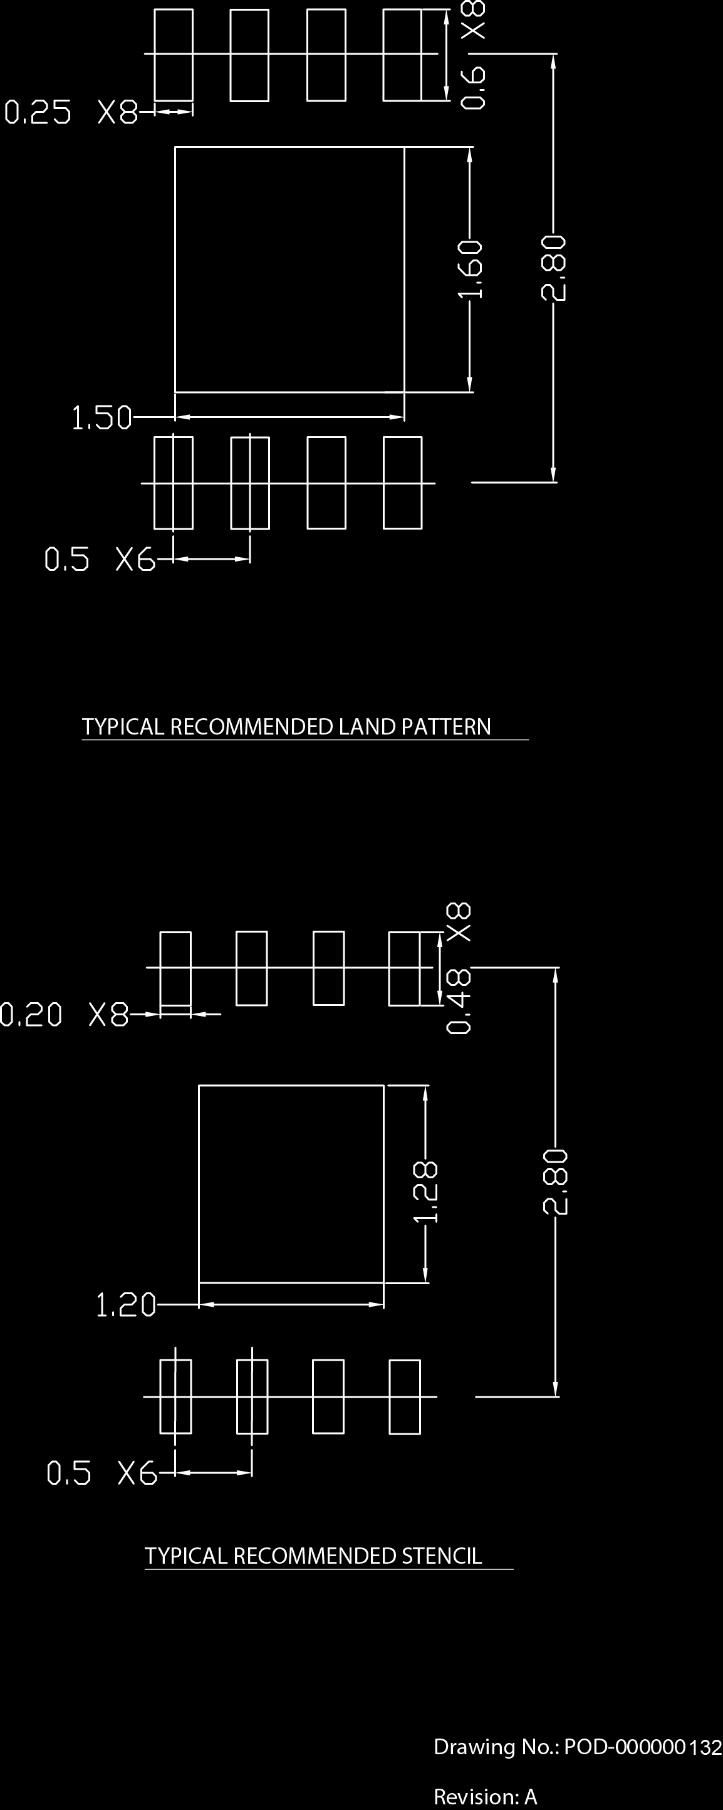 RECOMMENDED LAND PATTERN AND